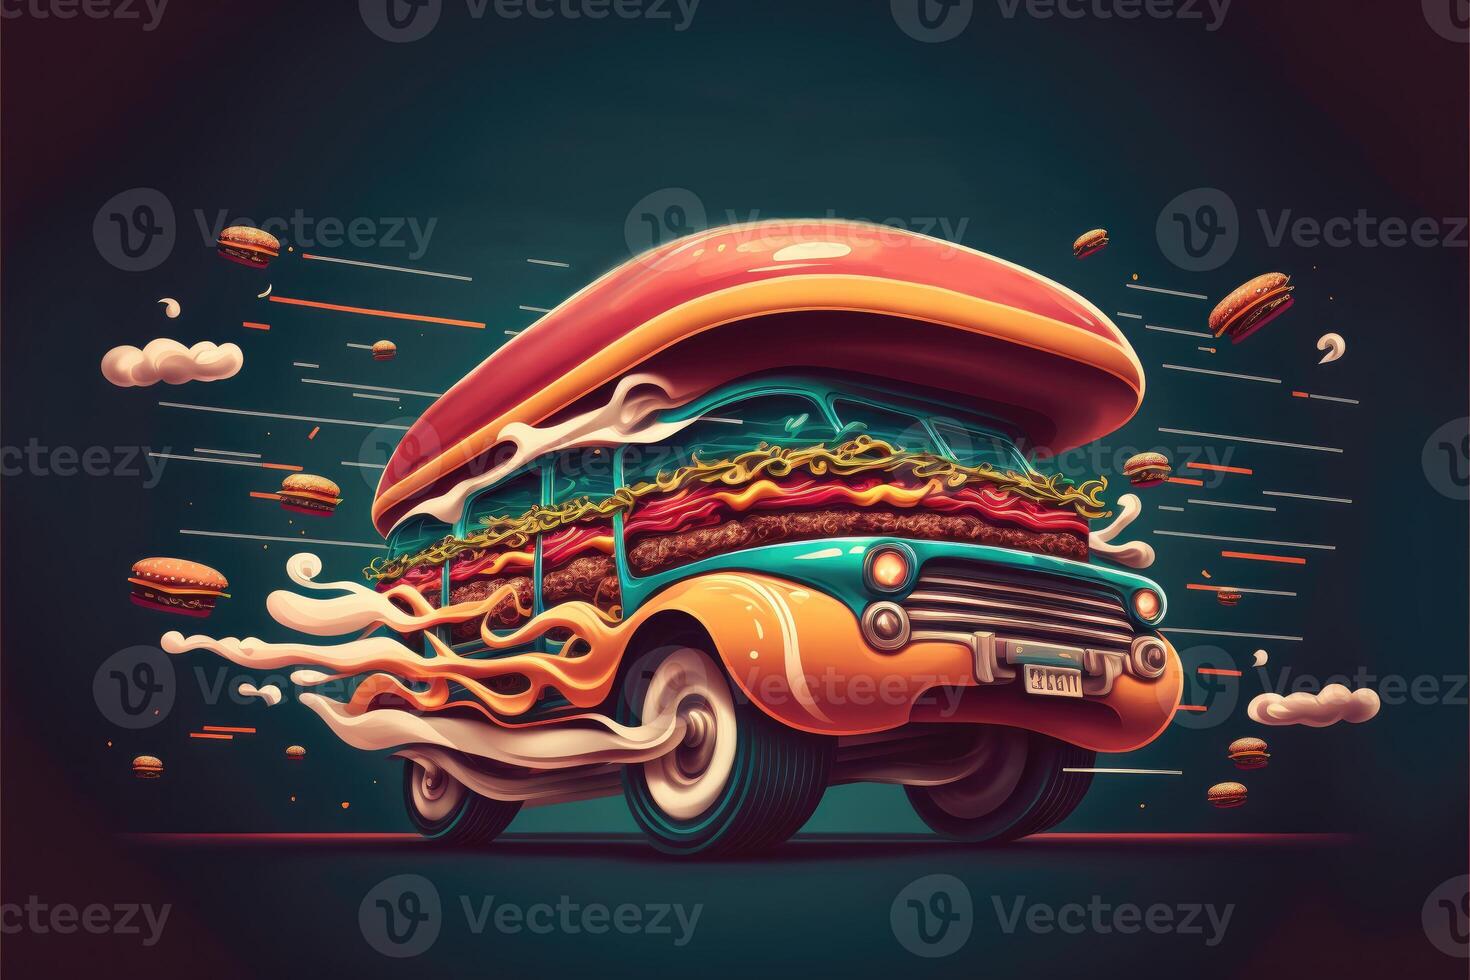 Burger delivery. Fast hamburger car. Cheeseburger as fast food car. Mascot burger car design. Logotype for restaurant or cafe. Street food festival symbol with burger in cartoon style. photo